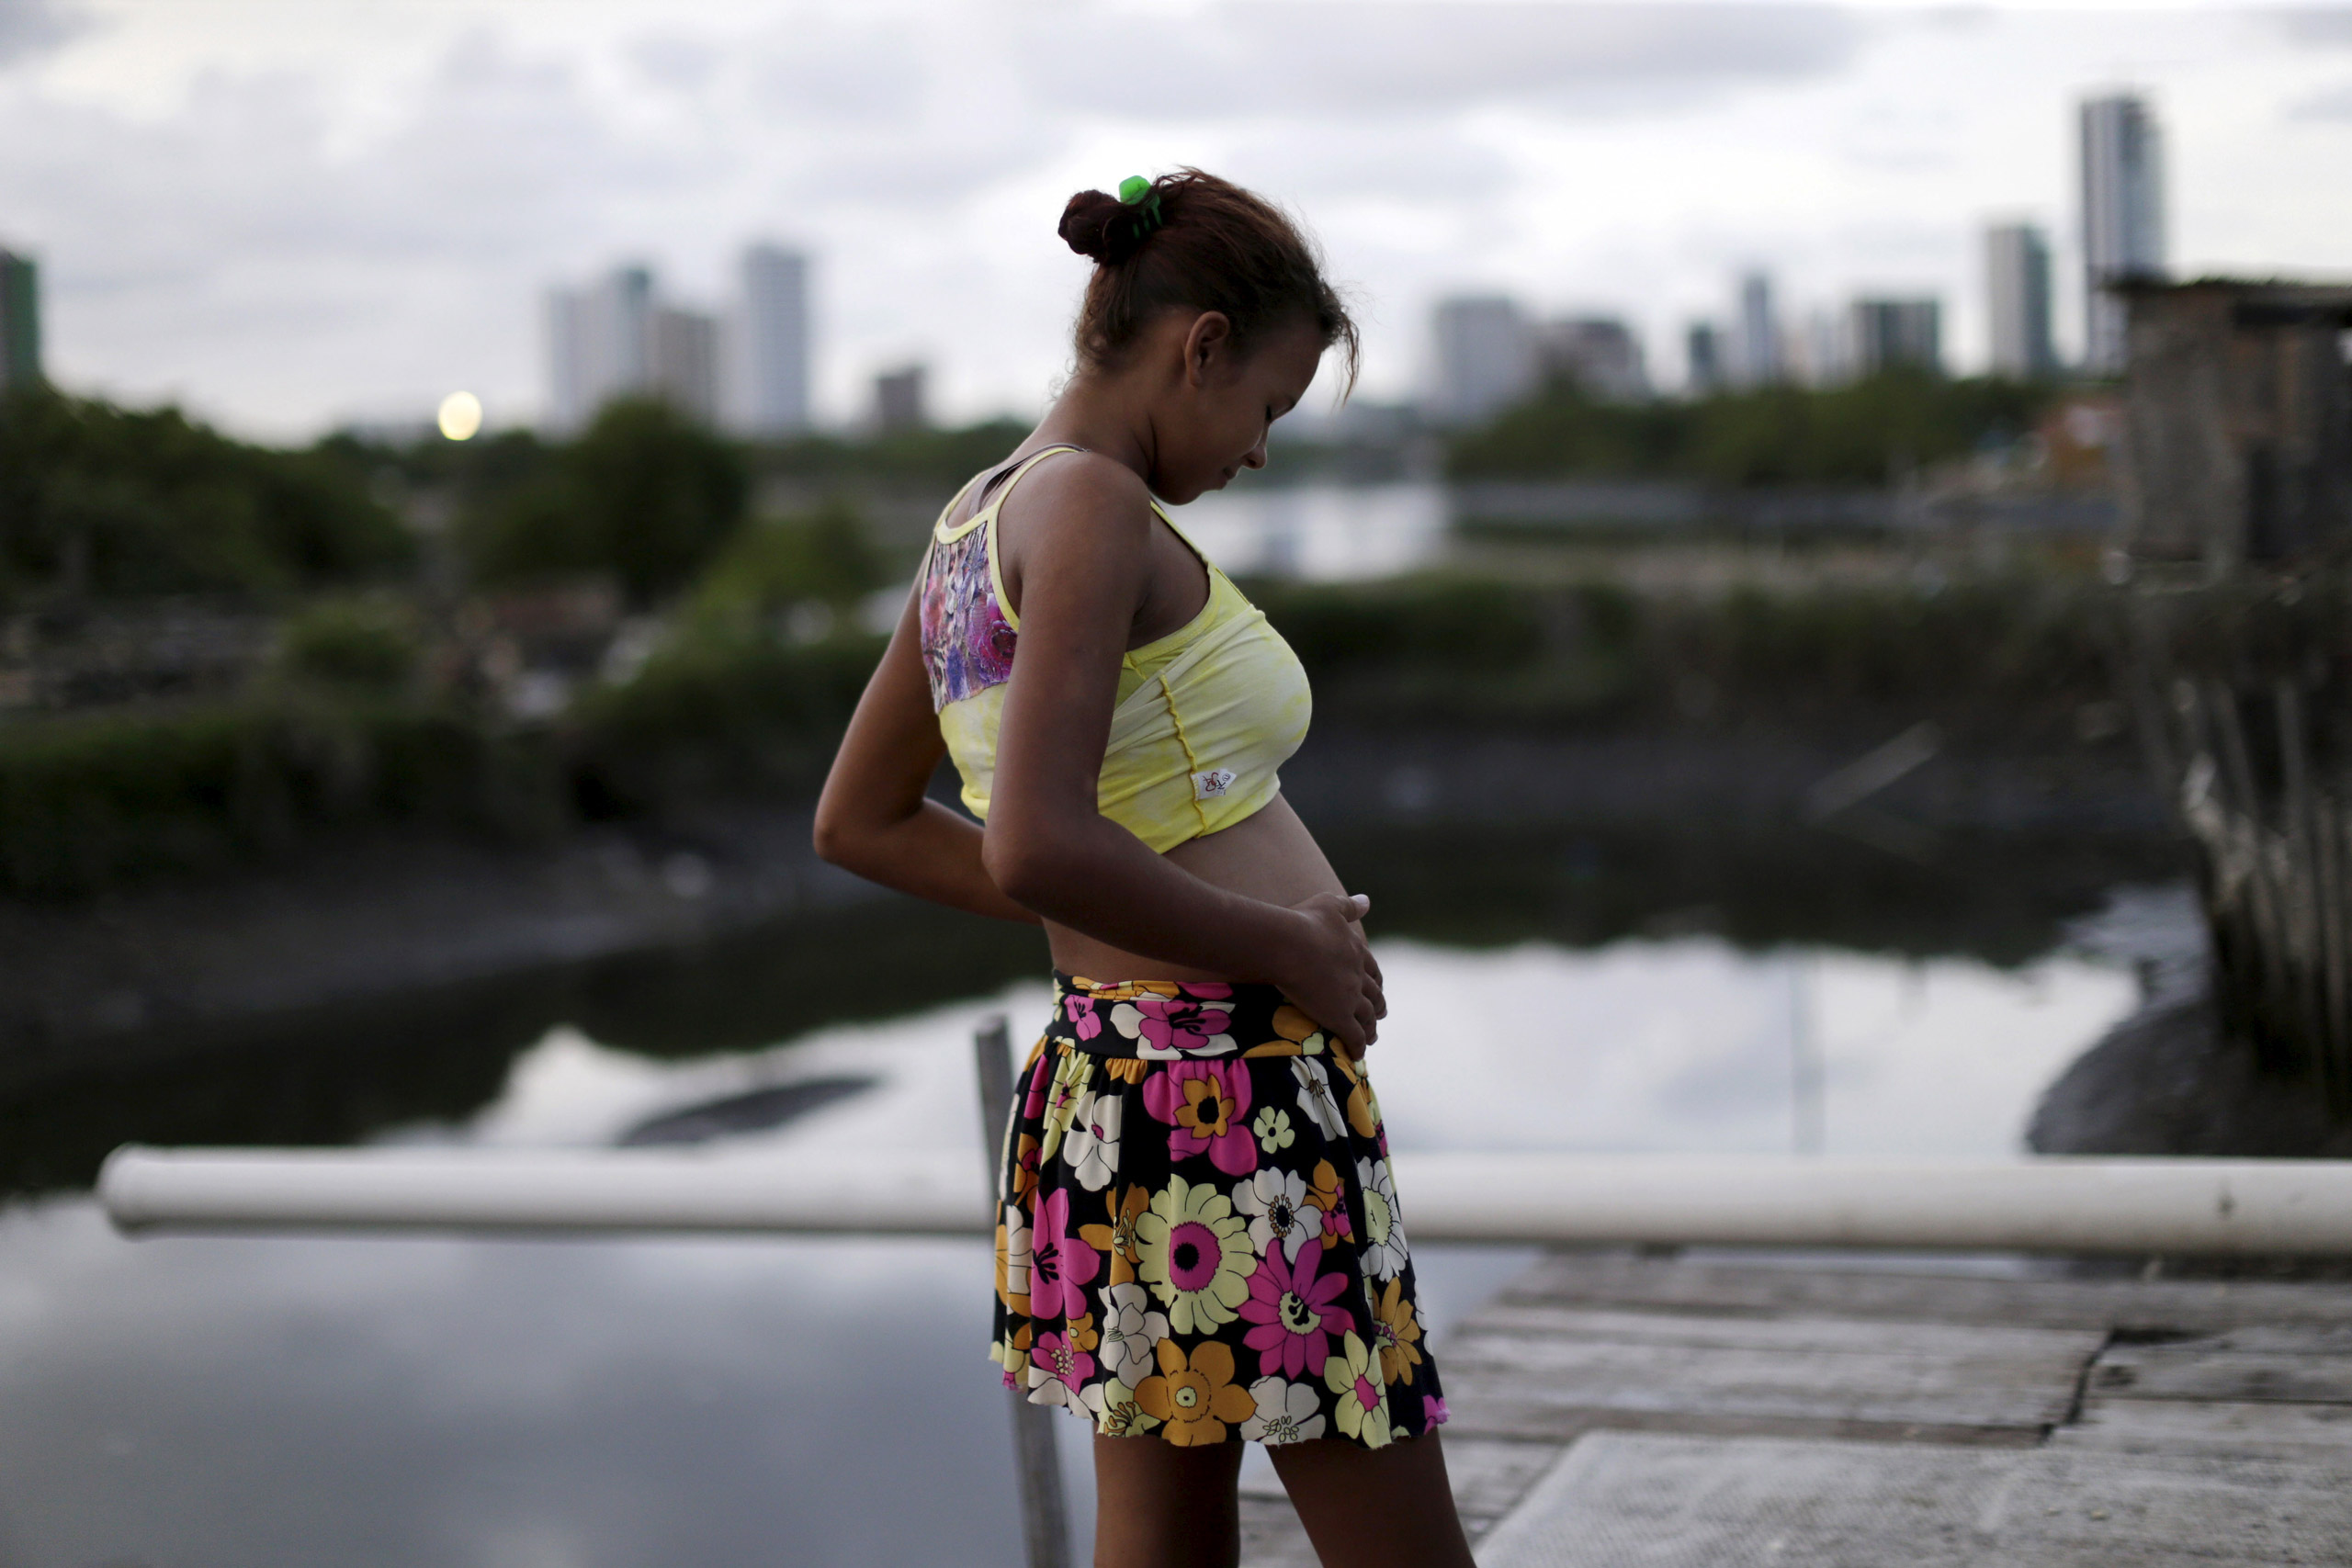 Eritania Maria, who is six months pregnant, is seen in front of her house at a slum in Recife